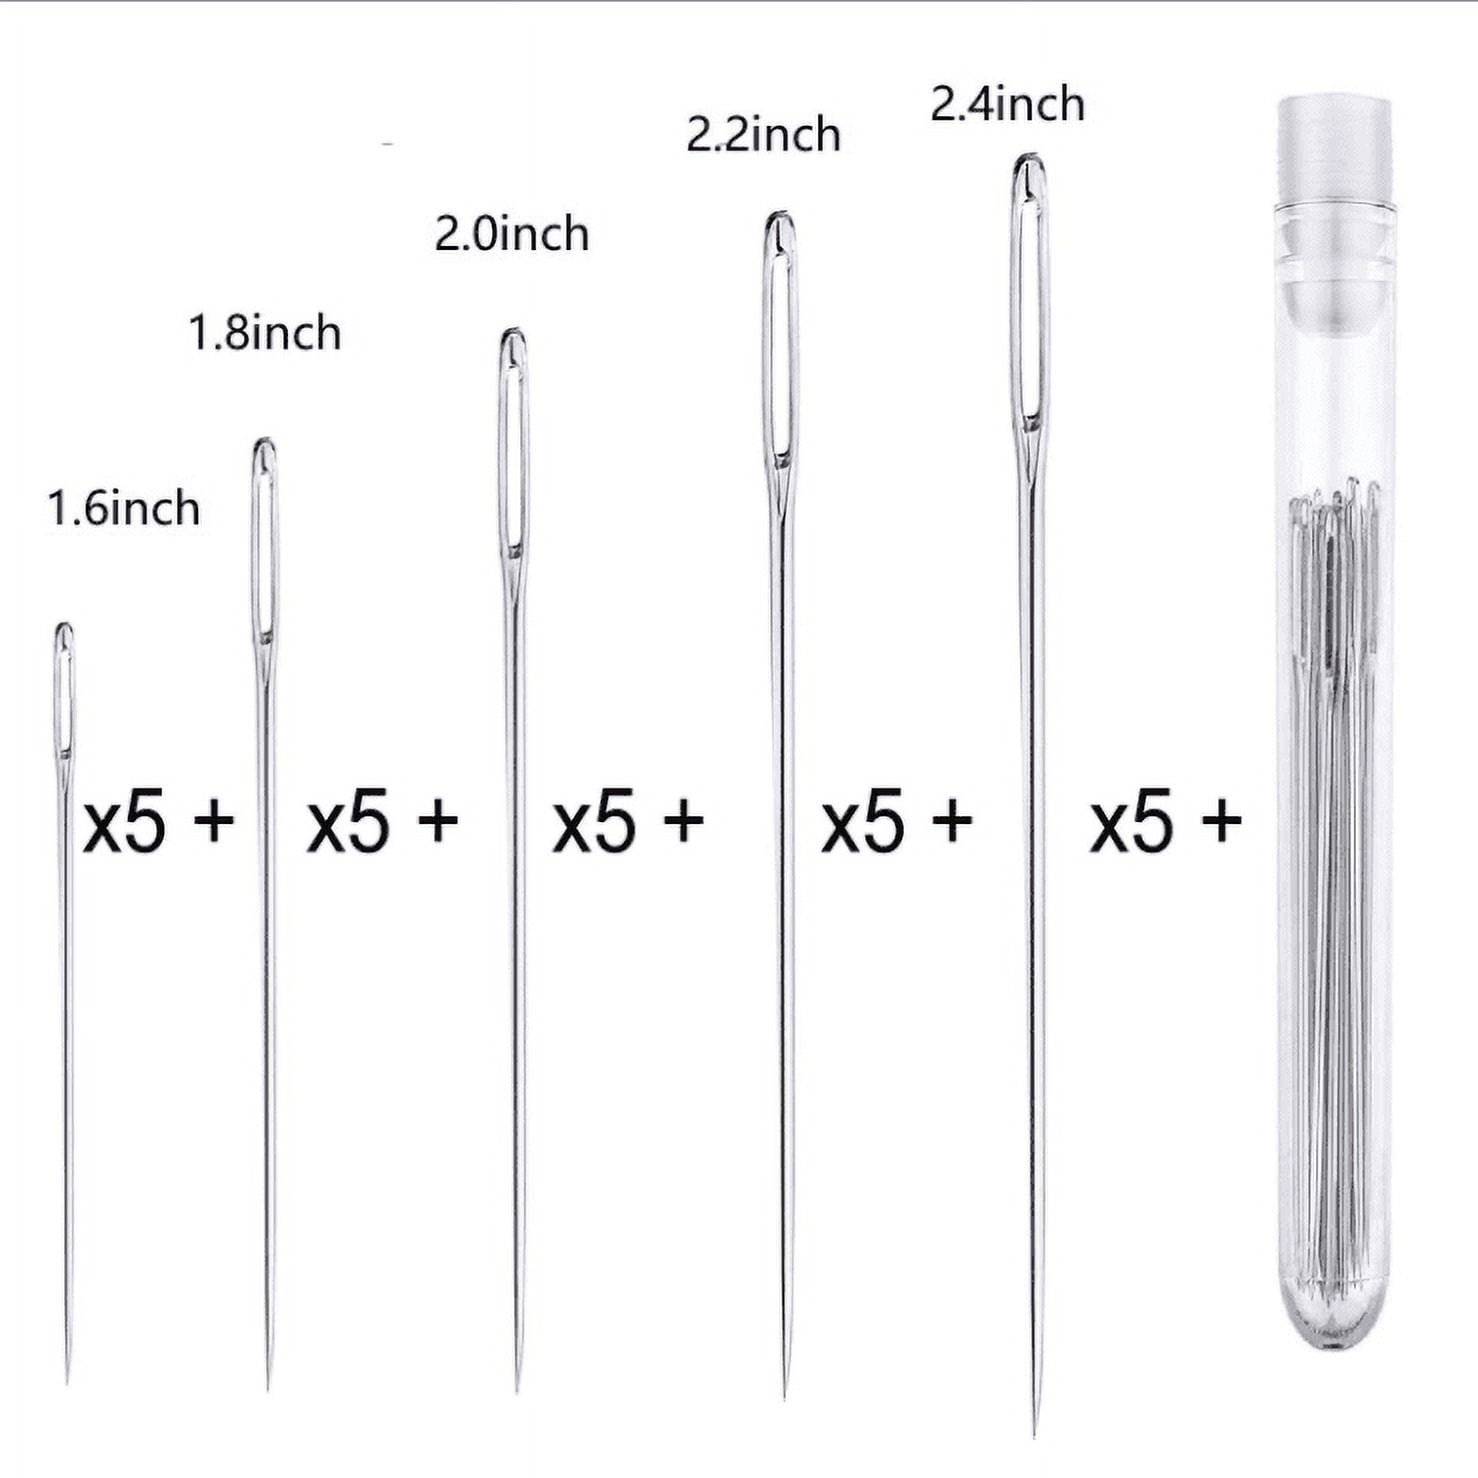  Large-Eye Needles for Hand Sewing, 50pcs Premium Large Eye  Sewing Needles with Threaders and Storage Tube 5 Size Large Eye Pointed  Stitching Needles for Stitching Crafting Projects and Embroidery